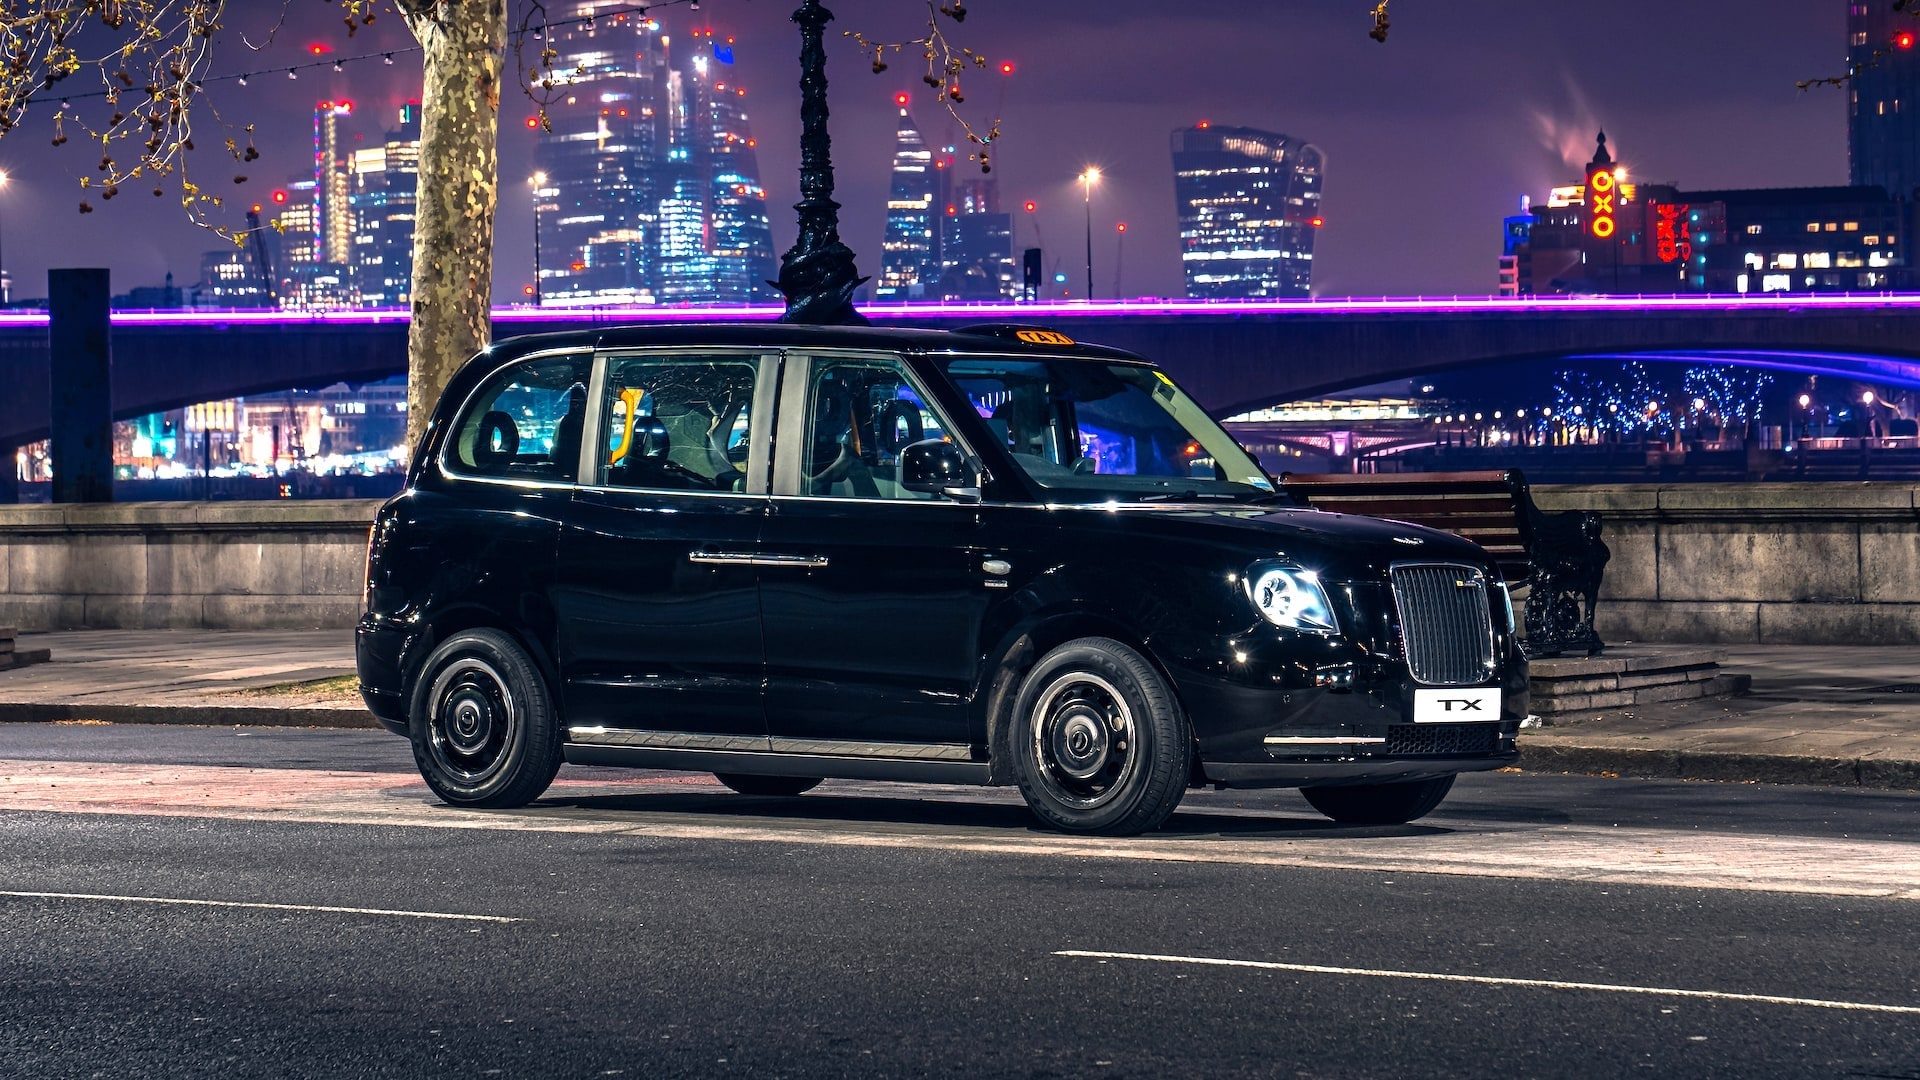 LEVC Electric London Taxi